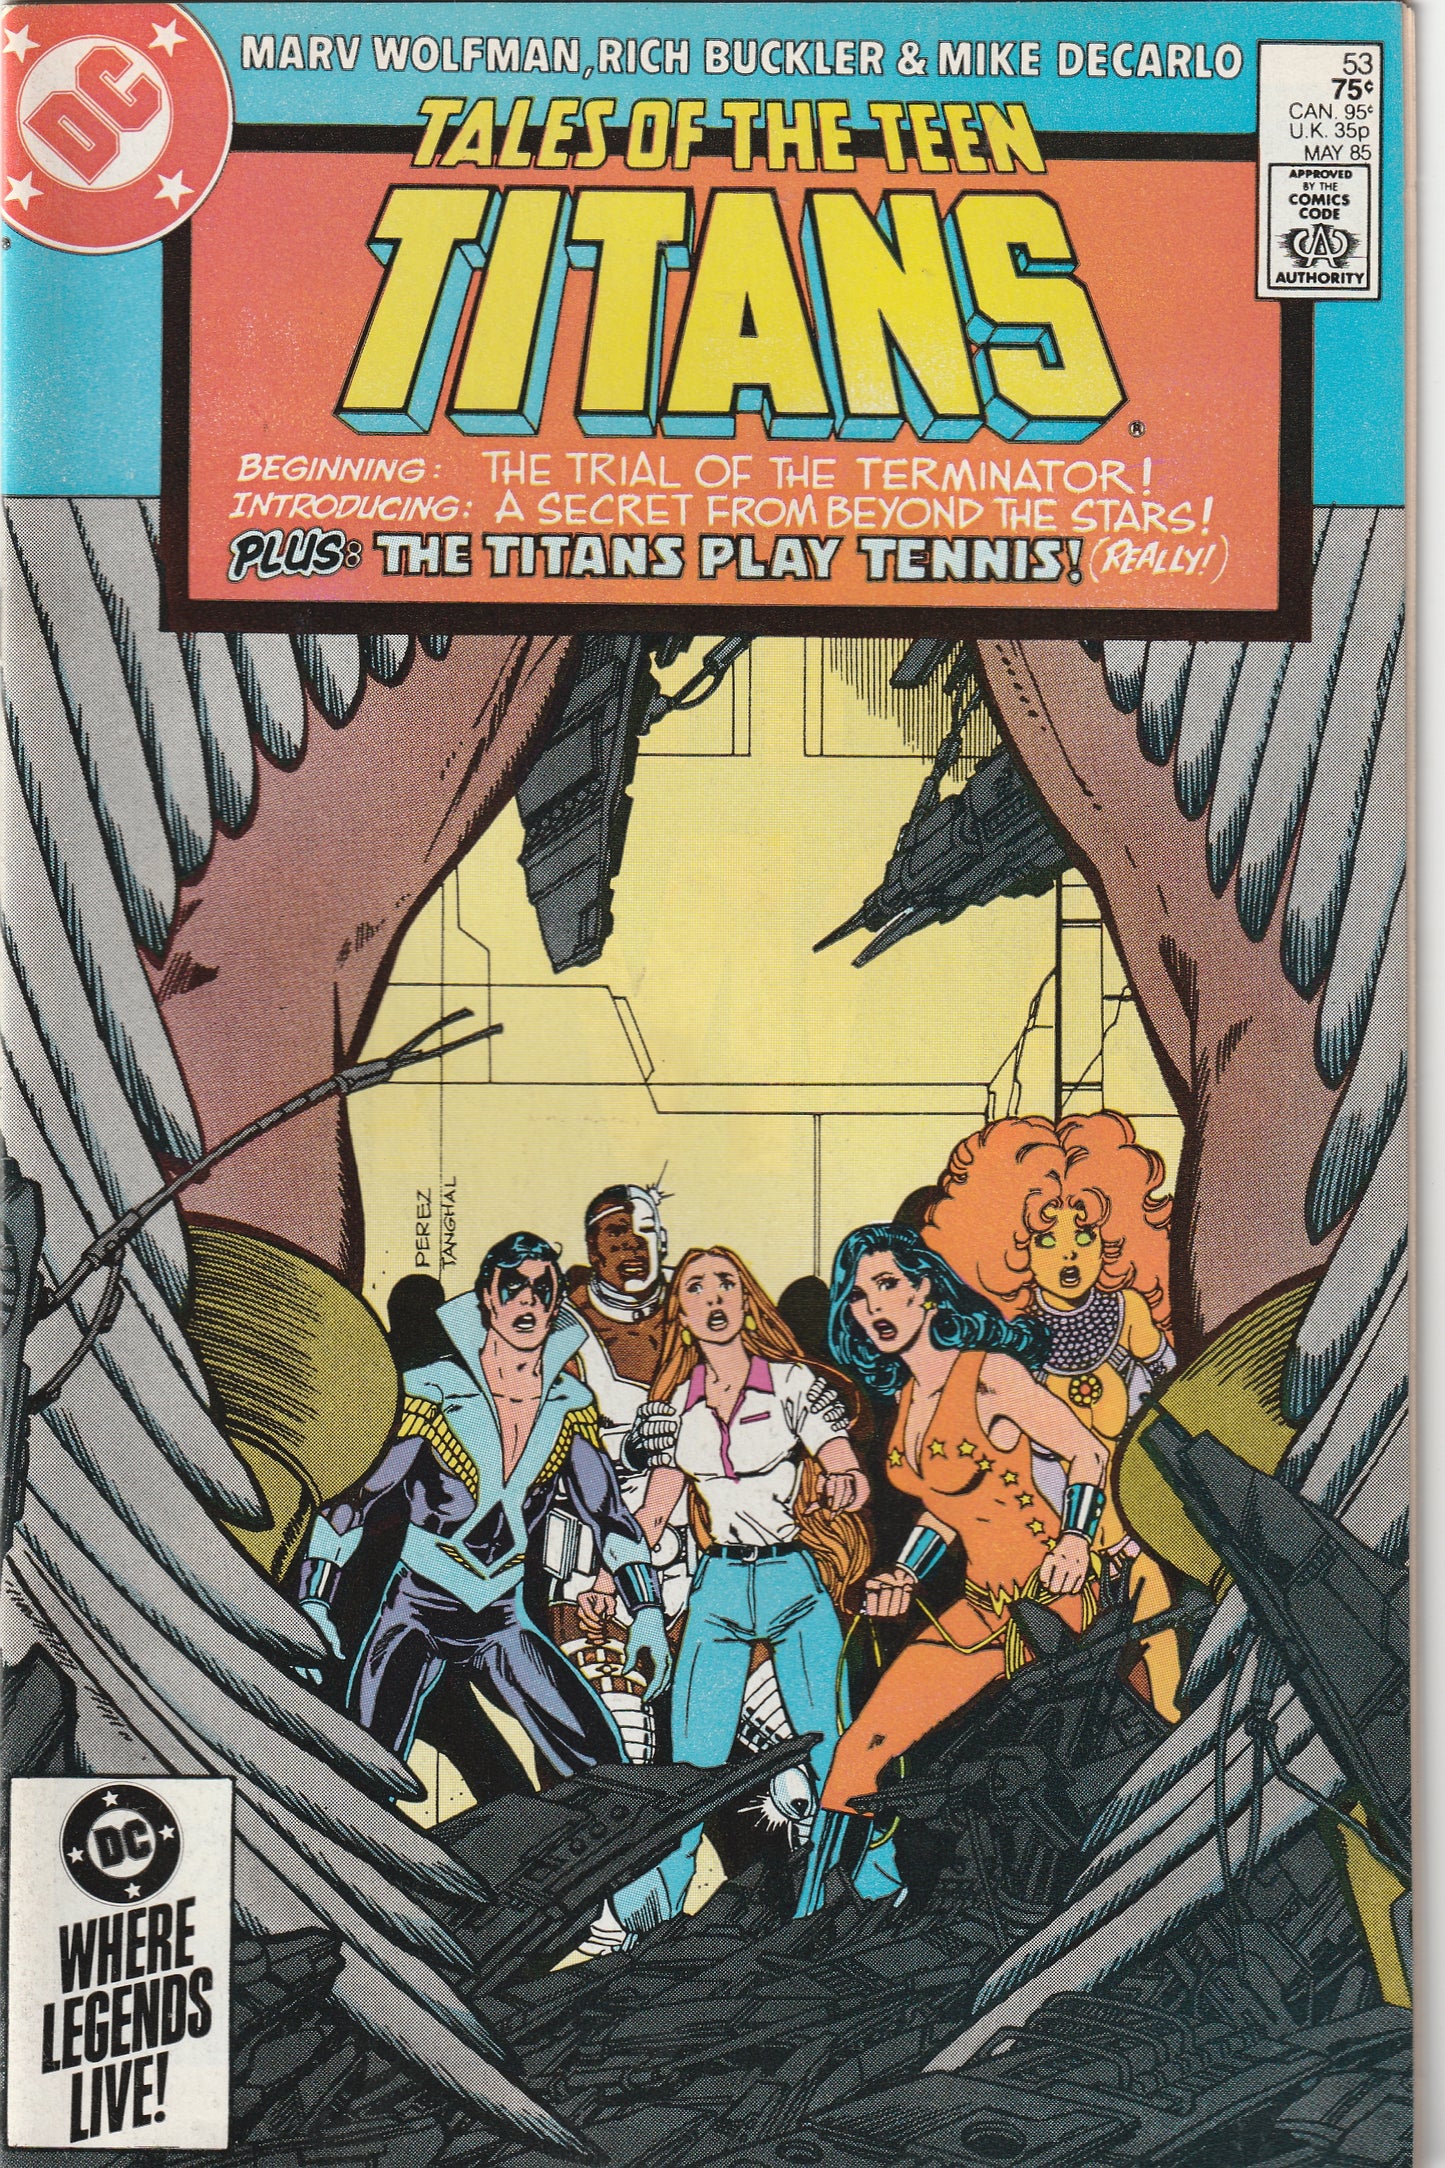 Tales of the Teen Titans #53 (1985)